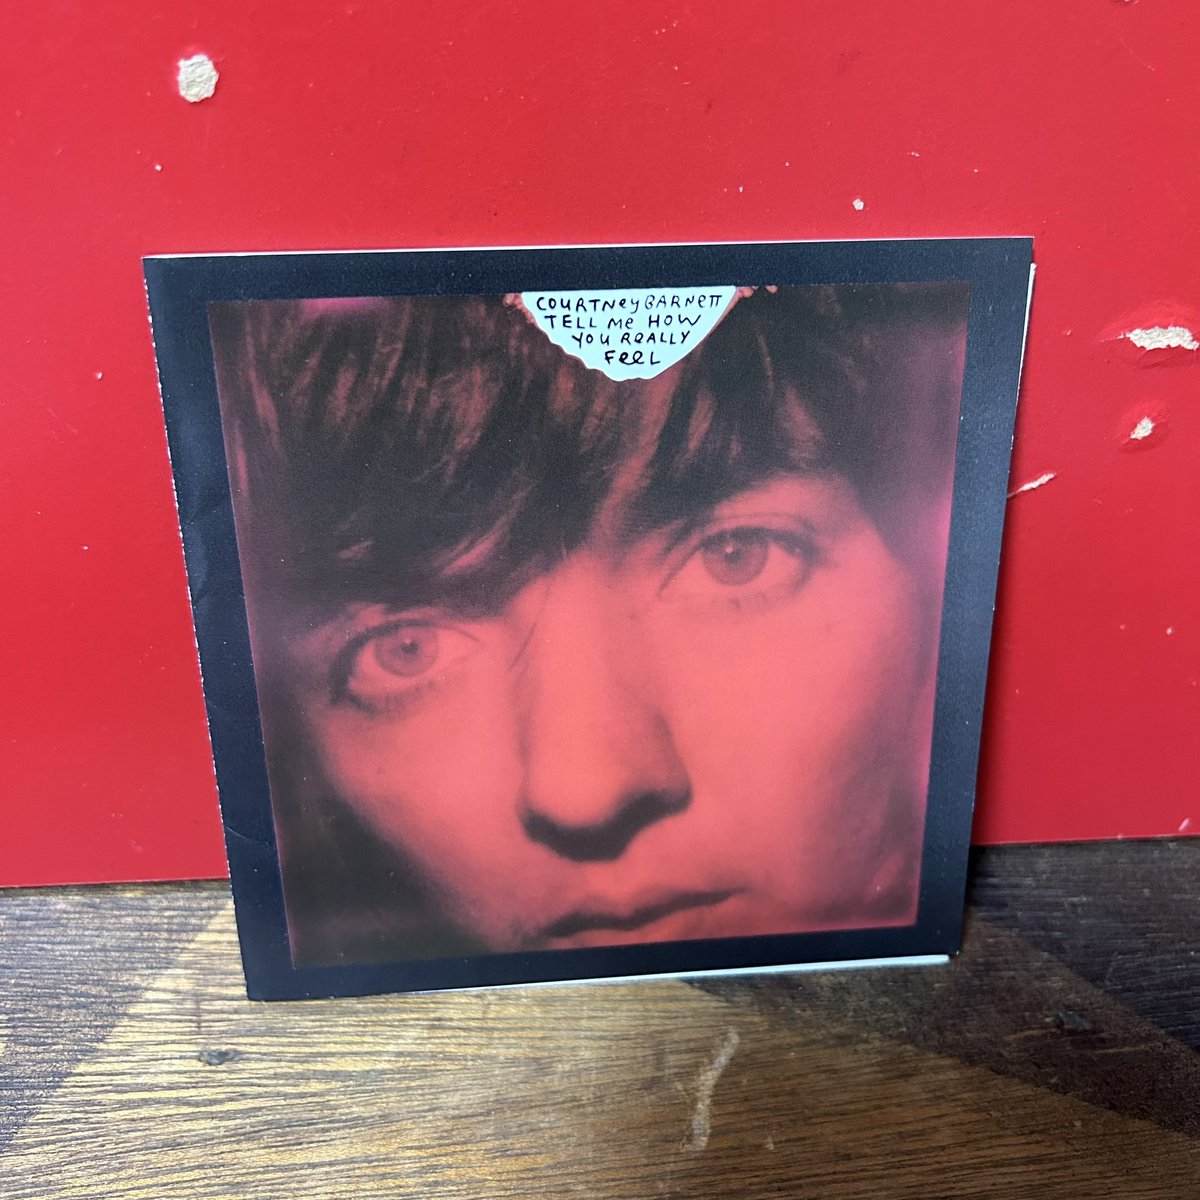 [Darling’s world] No.589
TELL ME HOW YOU REALLY FEEL / COURTNEY BARNETT 
#nowplaying #courtneybarnett #cdcollection